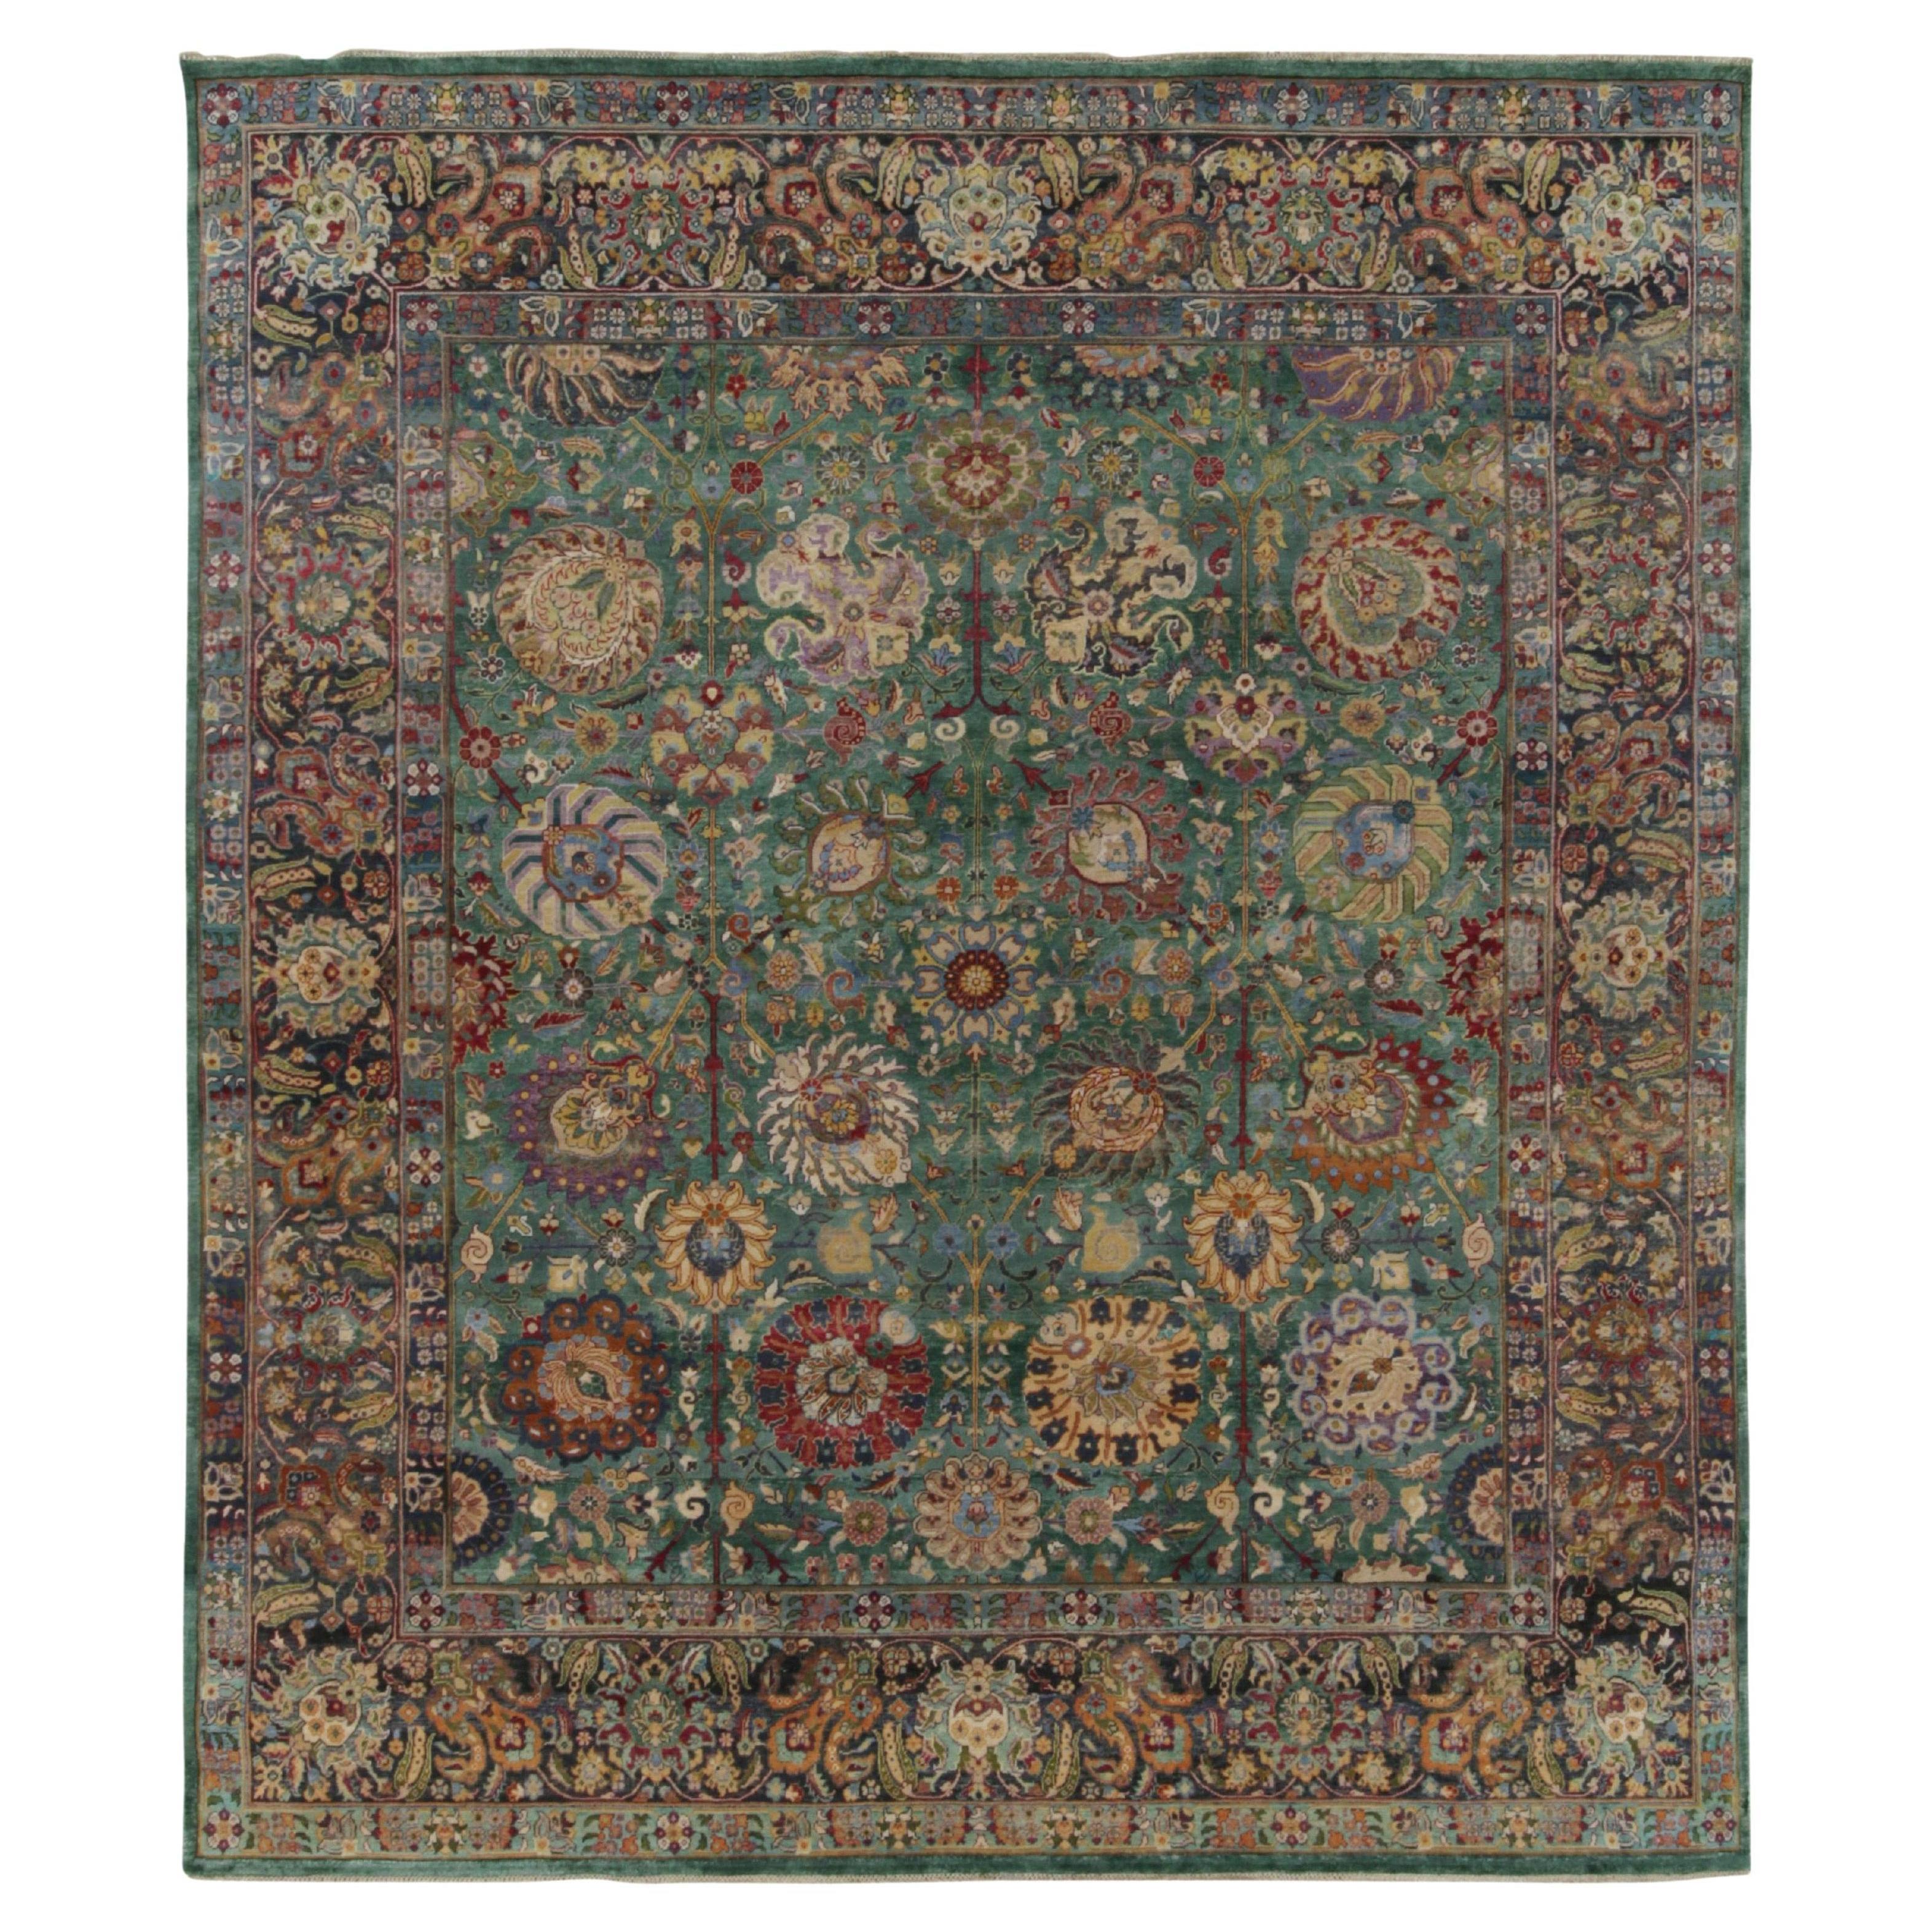 Rug & Kilim’s Classic Garden Style Rug in Green, Blue and Polychromatic Florals